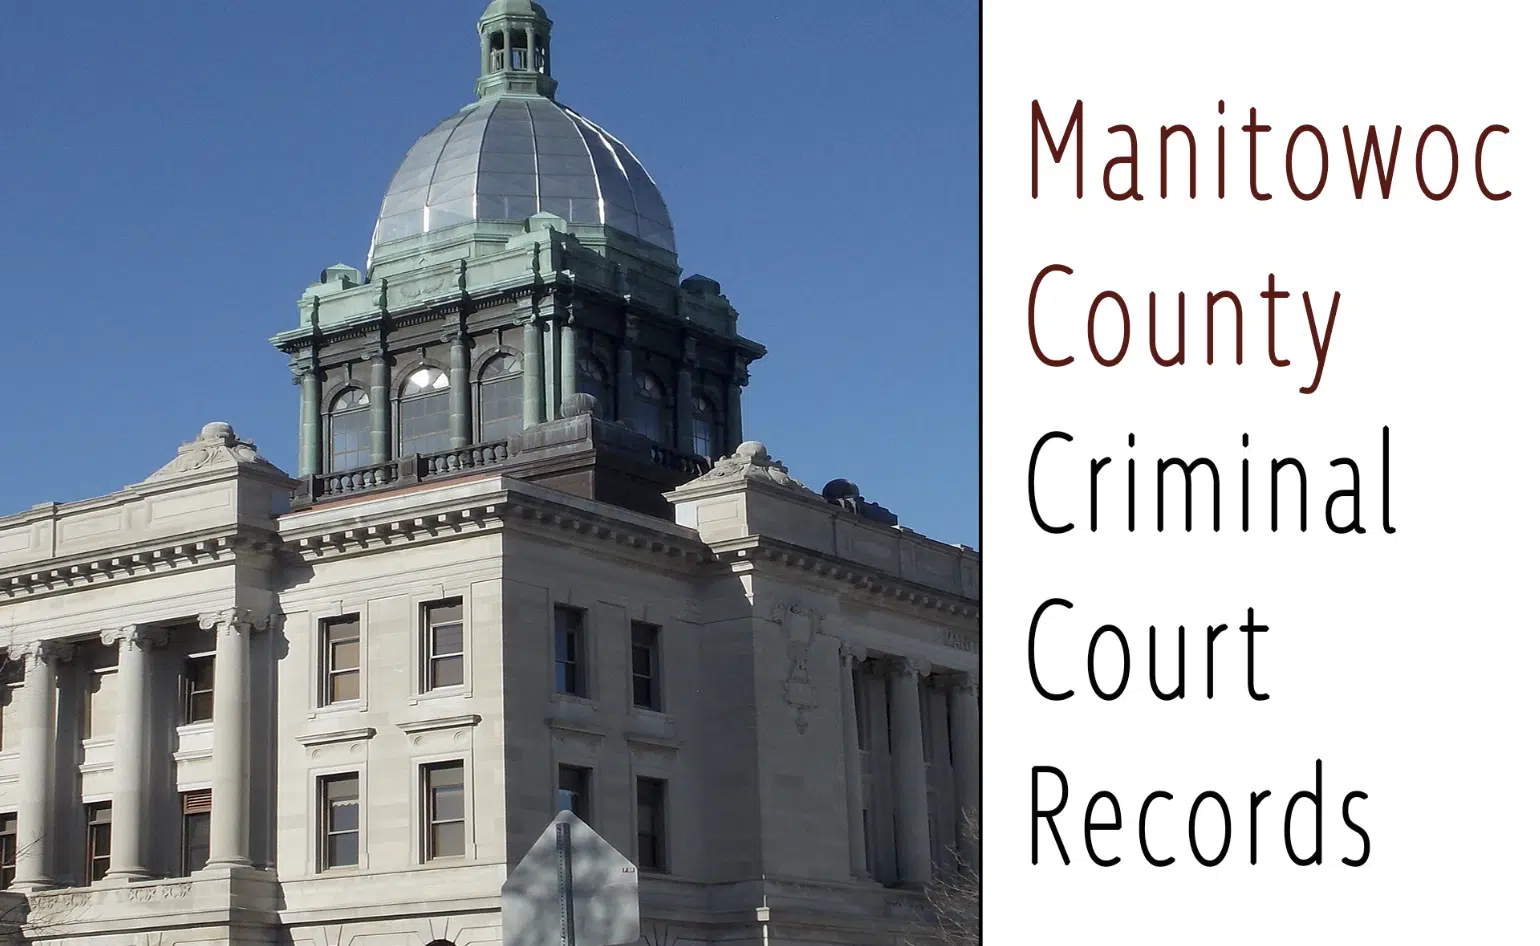 Manitowoc County Court Records Seehafer News